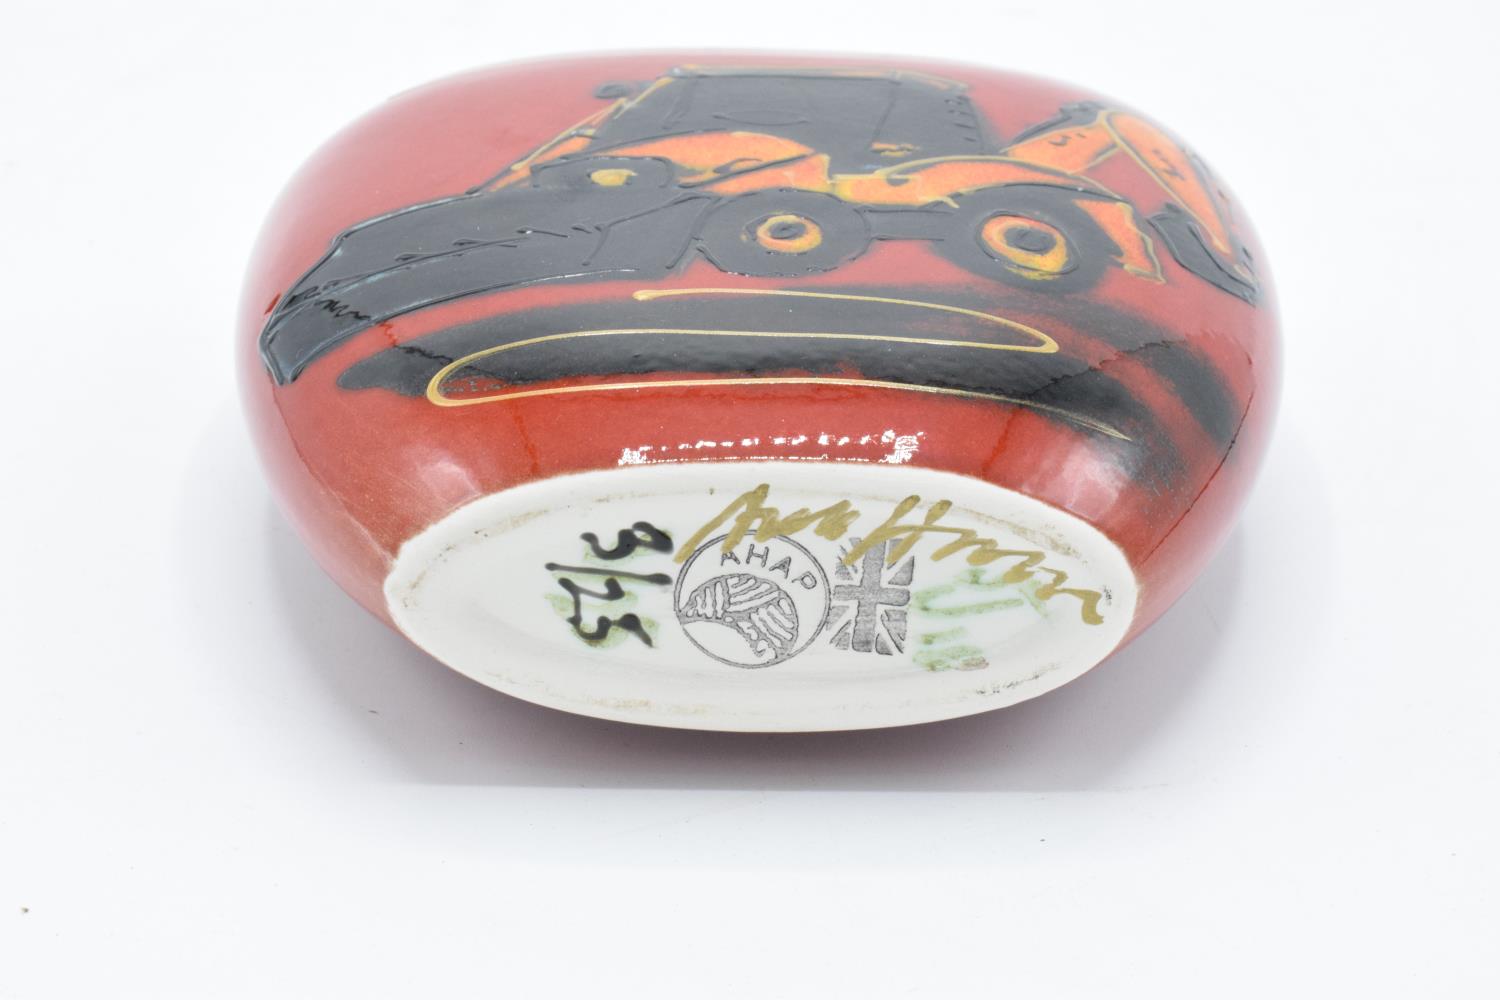 Anita Harris Art Pottery limited edition vase of a Digger: produced in an exclusive edition of 25 - Image 3 of 3